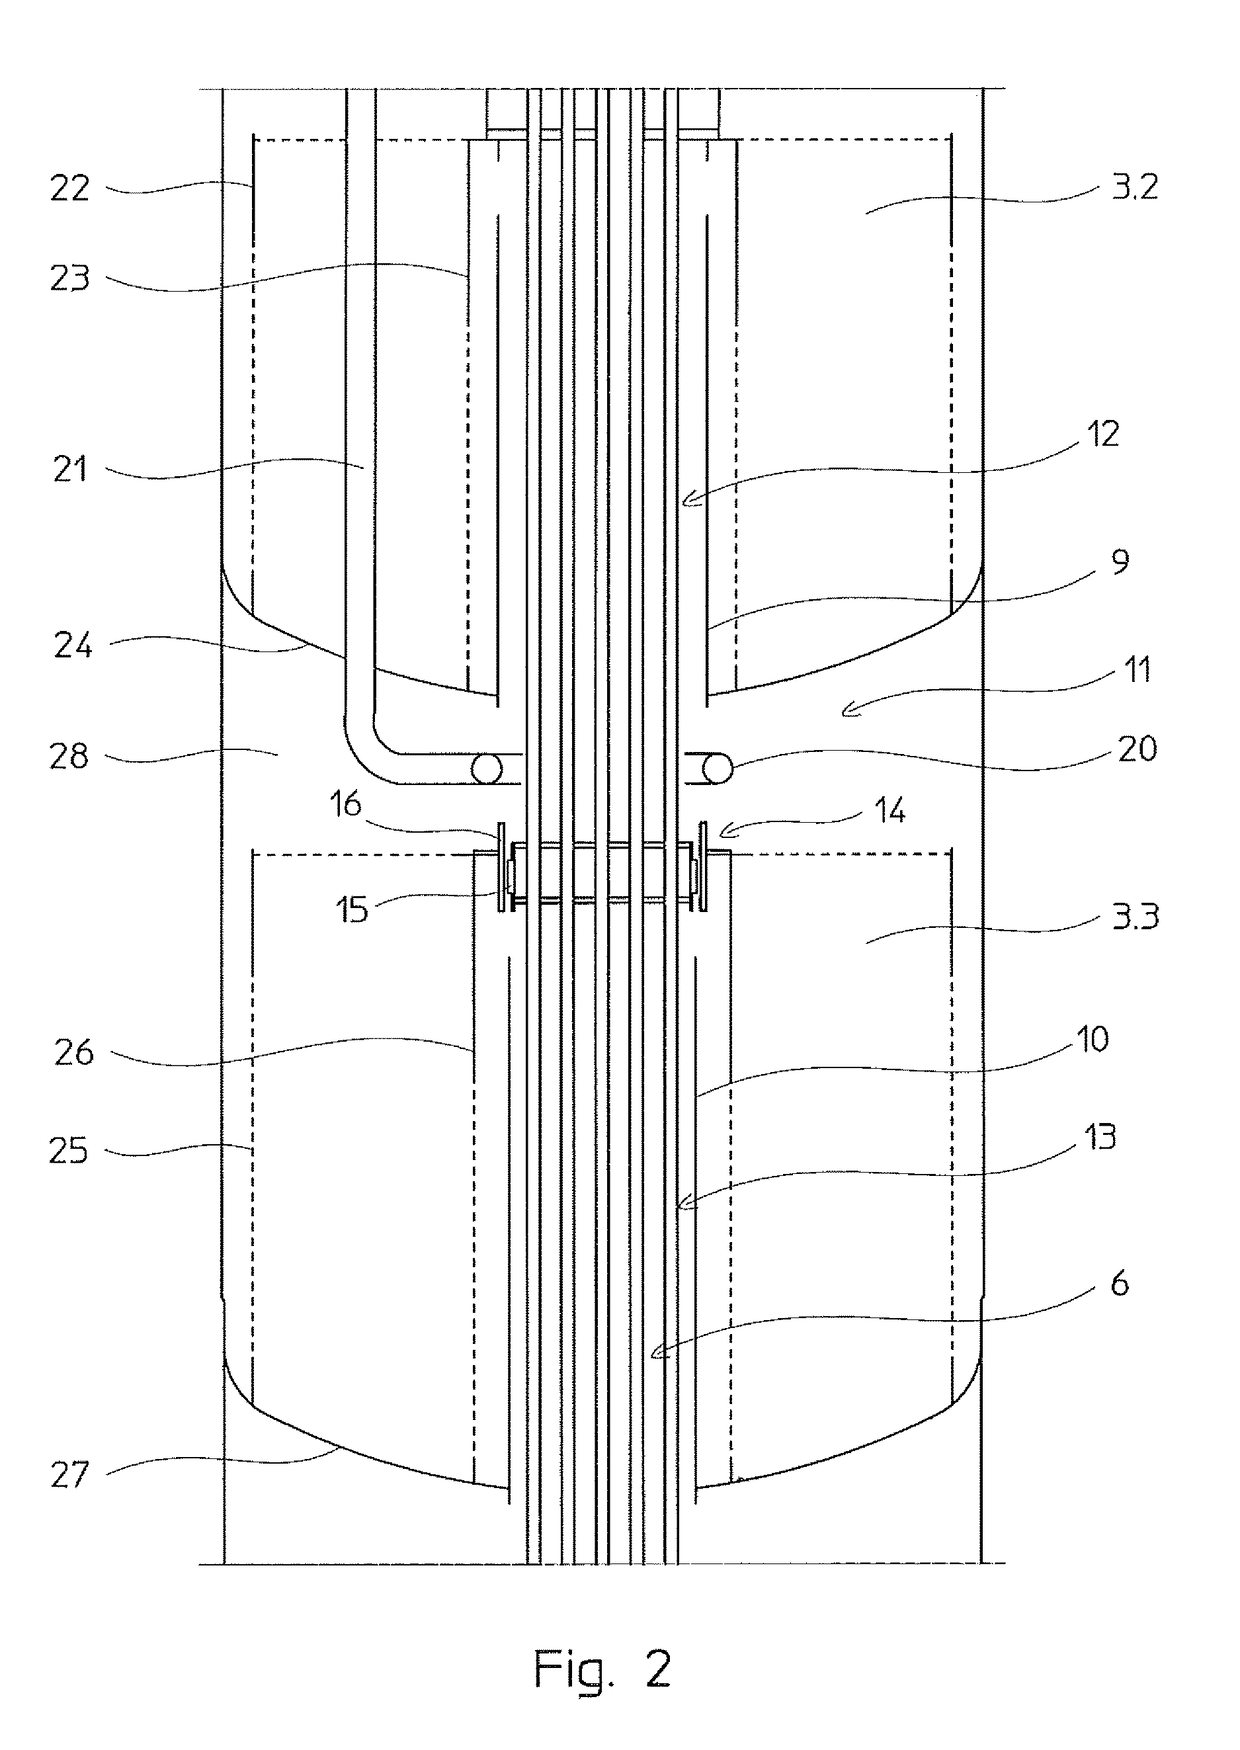 Adiabatic multi-bed catalytic converter with inter-bed cooling